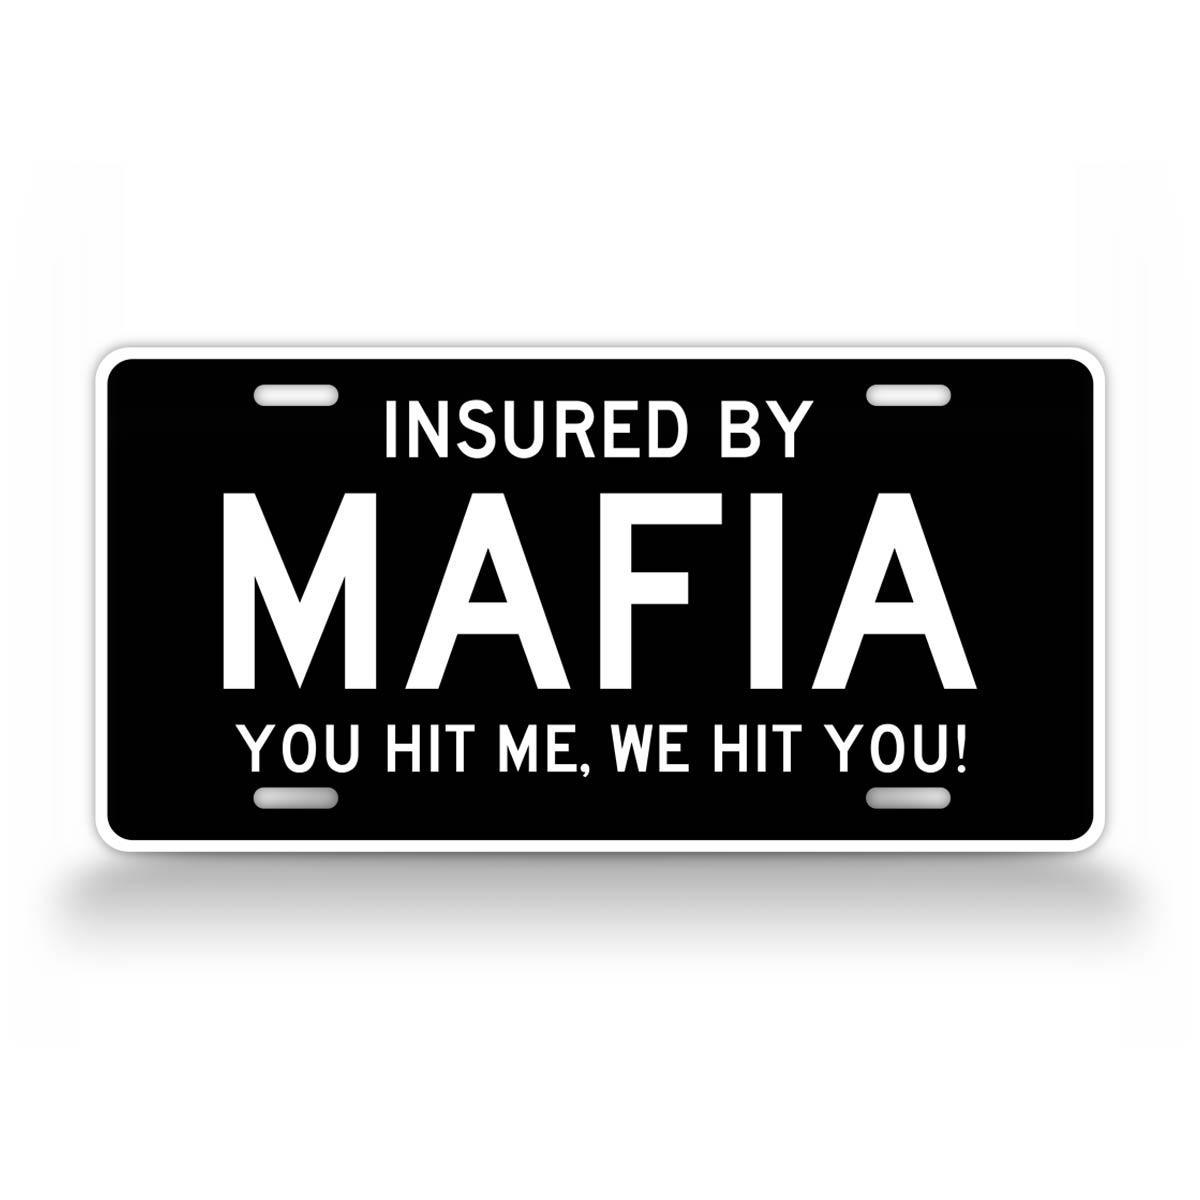 Insured By Mafia You Hit Me, We Hit You! Funny License Plate 